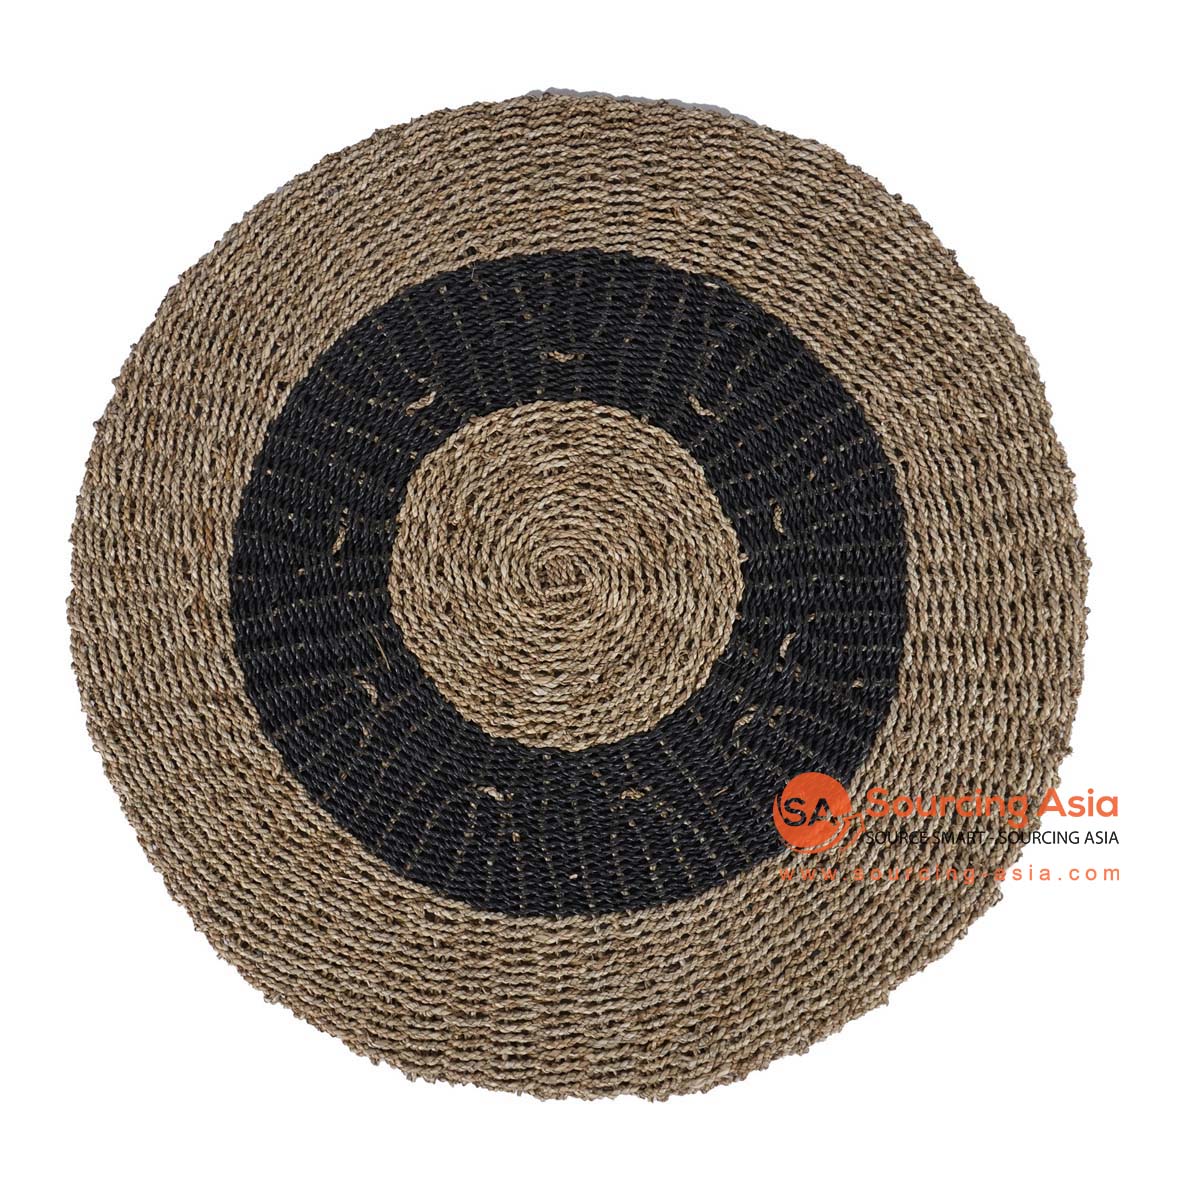 HBSC354 NATURAL AND BLACK SEAGRASS ROUND RUG